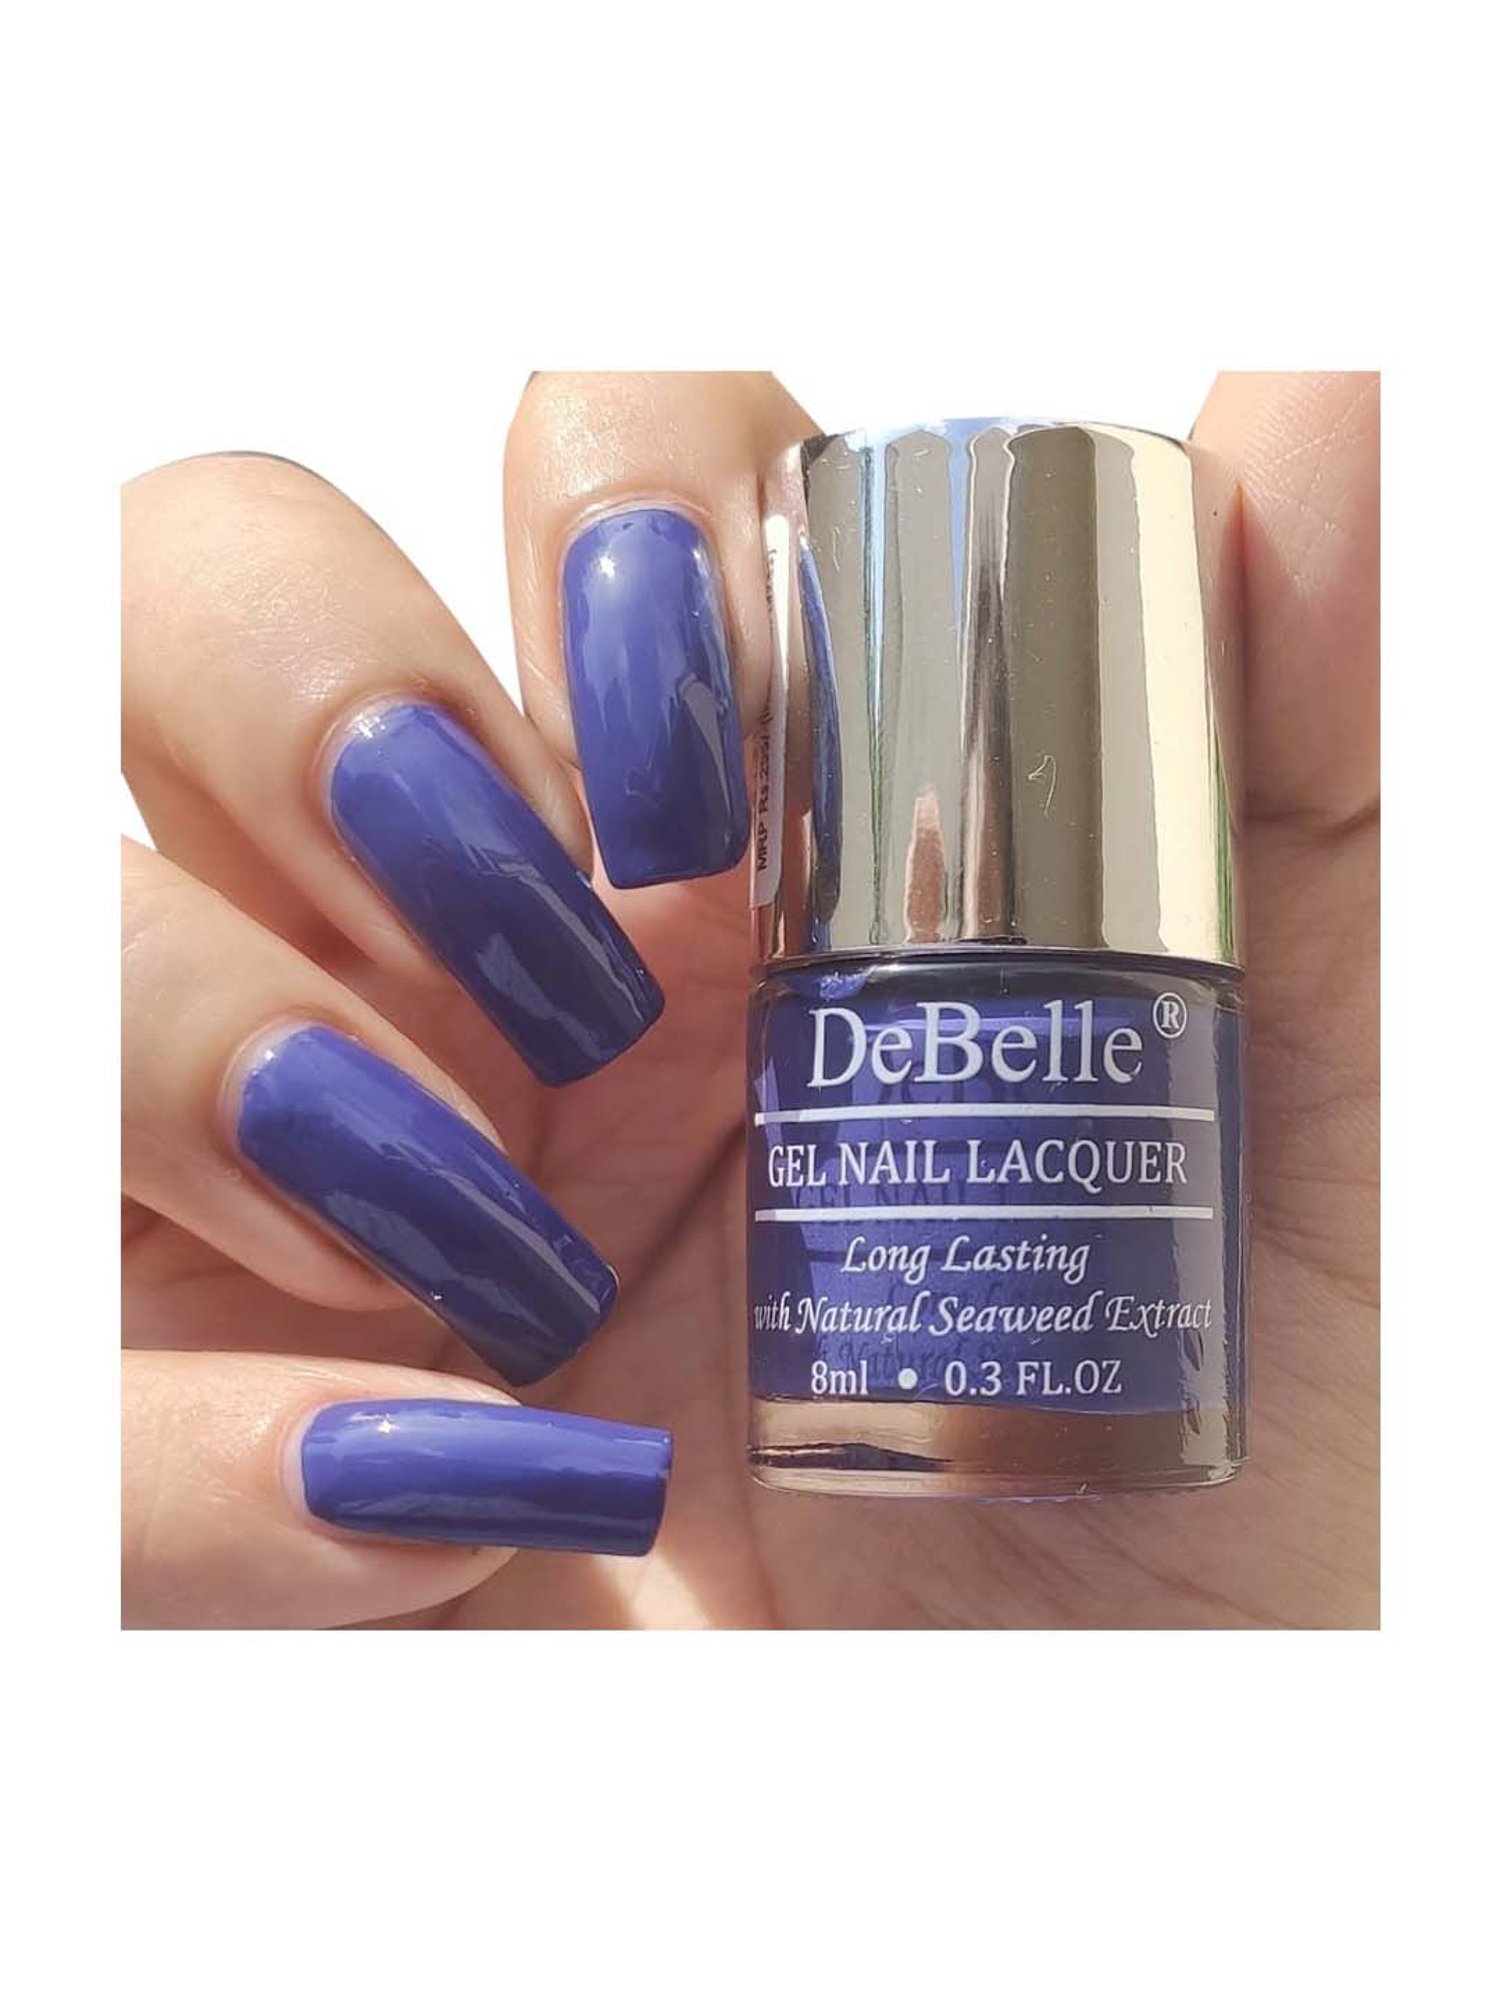 DeBelle Gel Nail Lacquer Blackberry Mousse (Indigo), 8ml: Buy DeBelle Gel  Nail Lacquer Blackberry Mousse (Indigo), 8ml at Best Prices in India -  Snapdeal